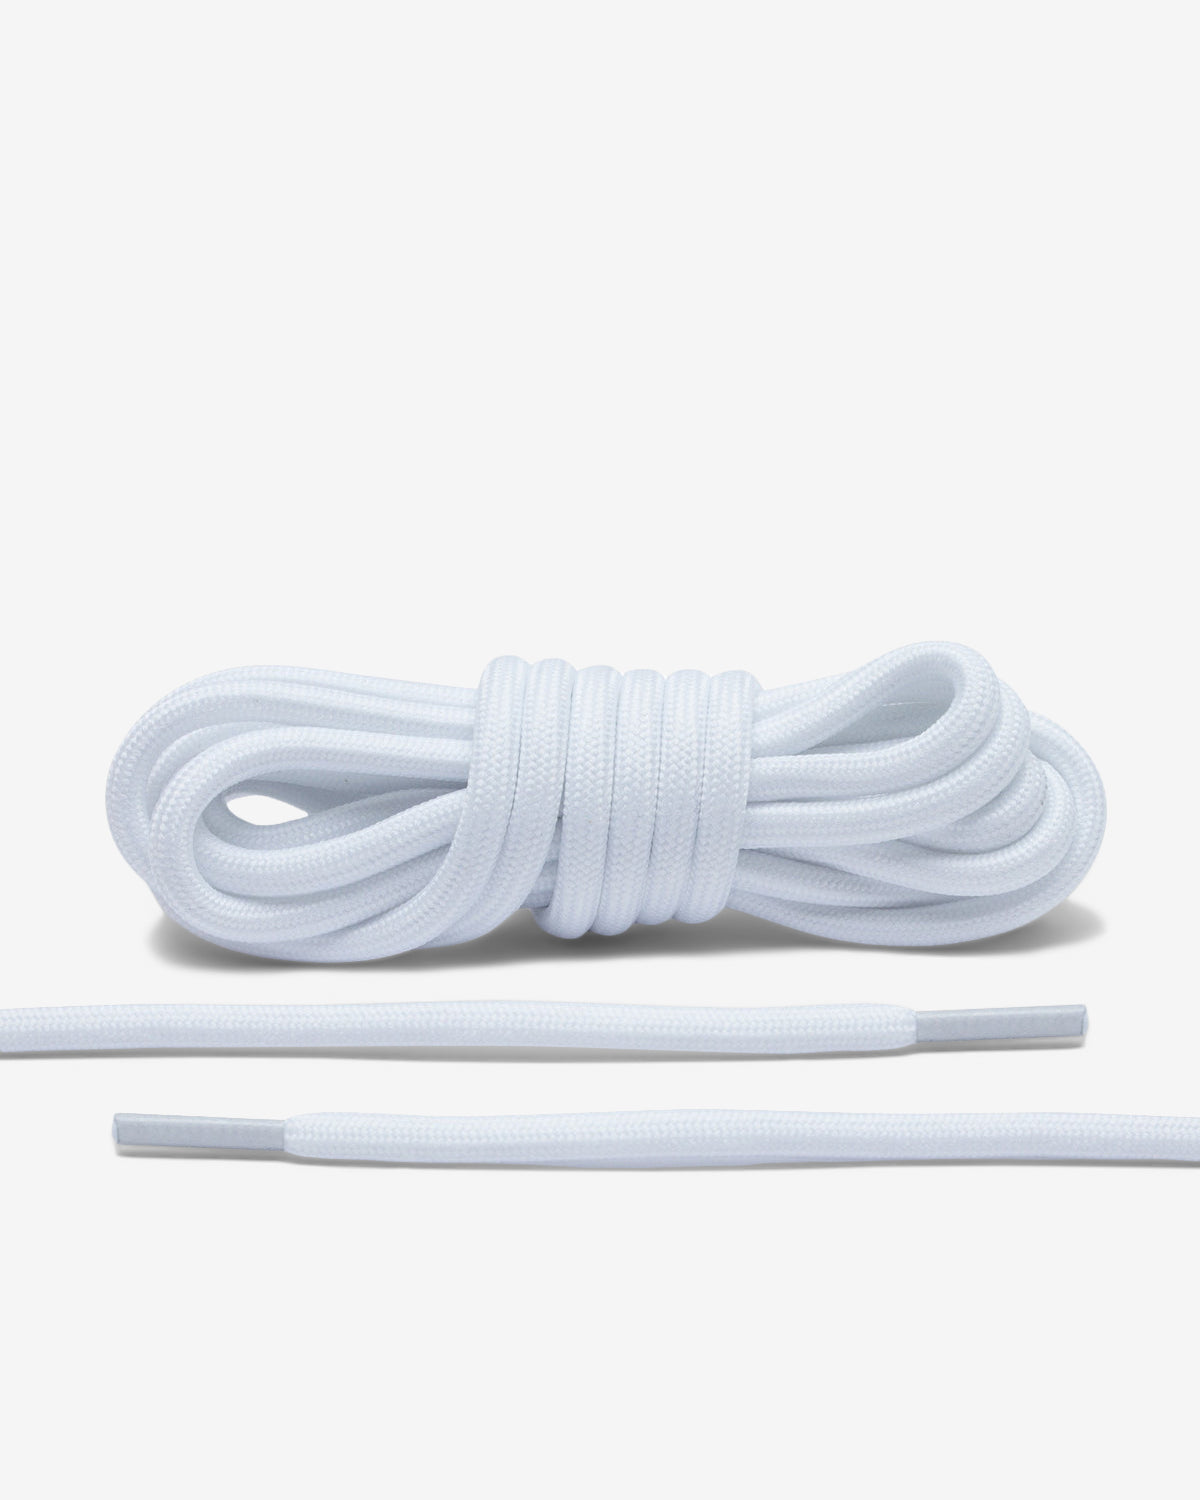 ROPE LACES - WHITE